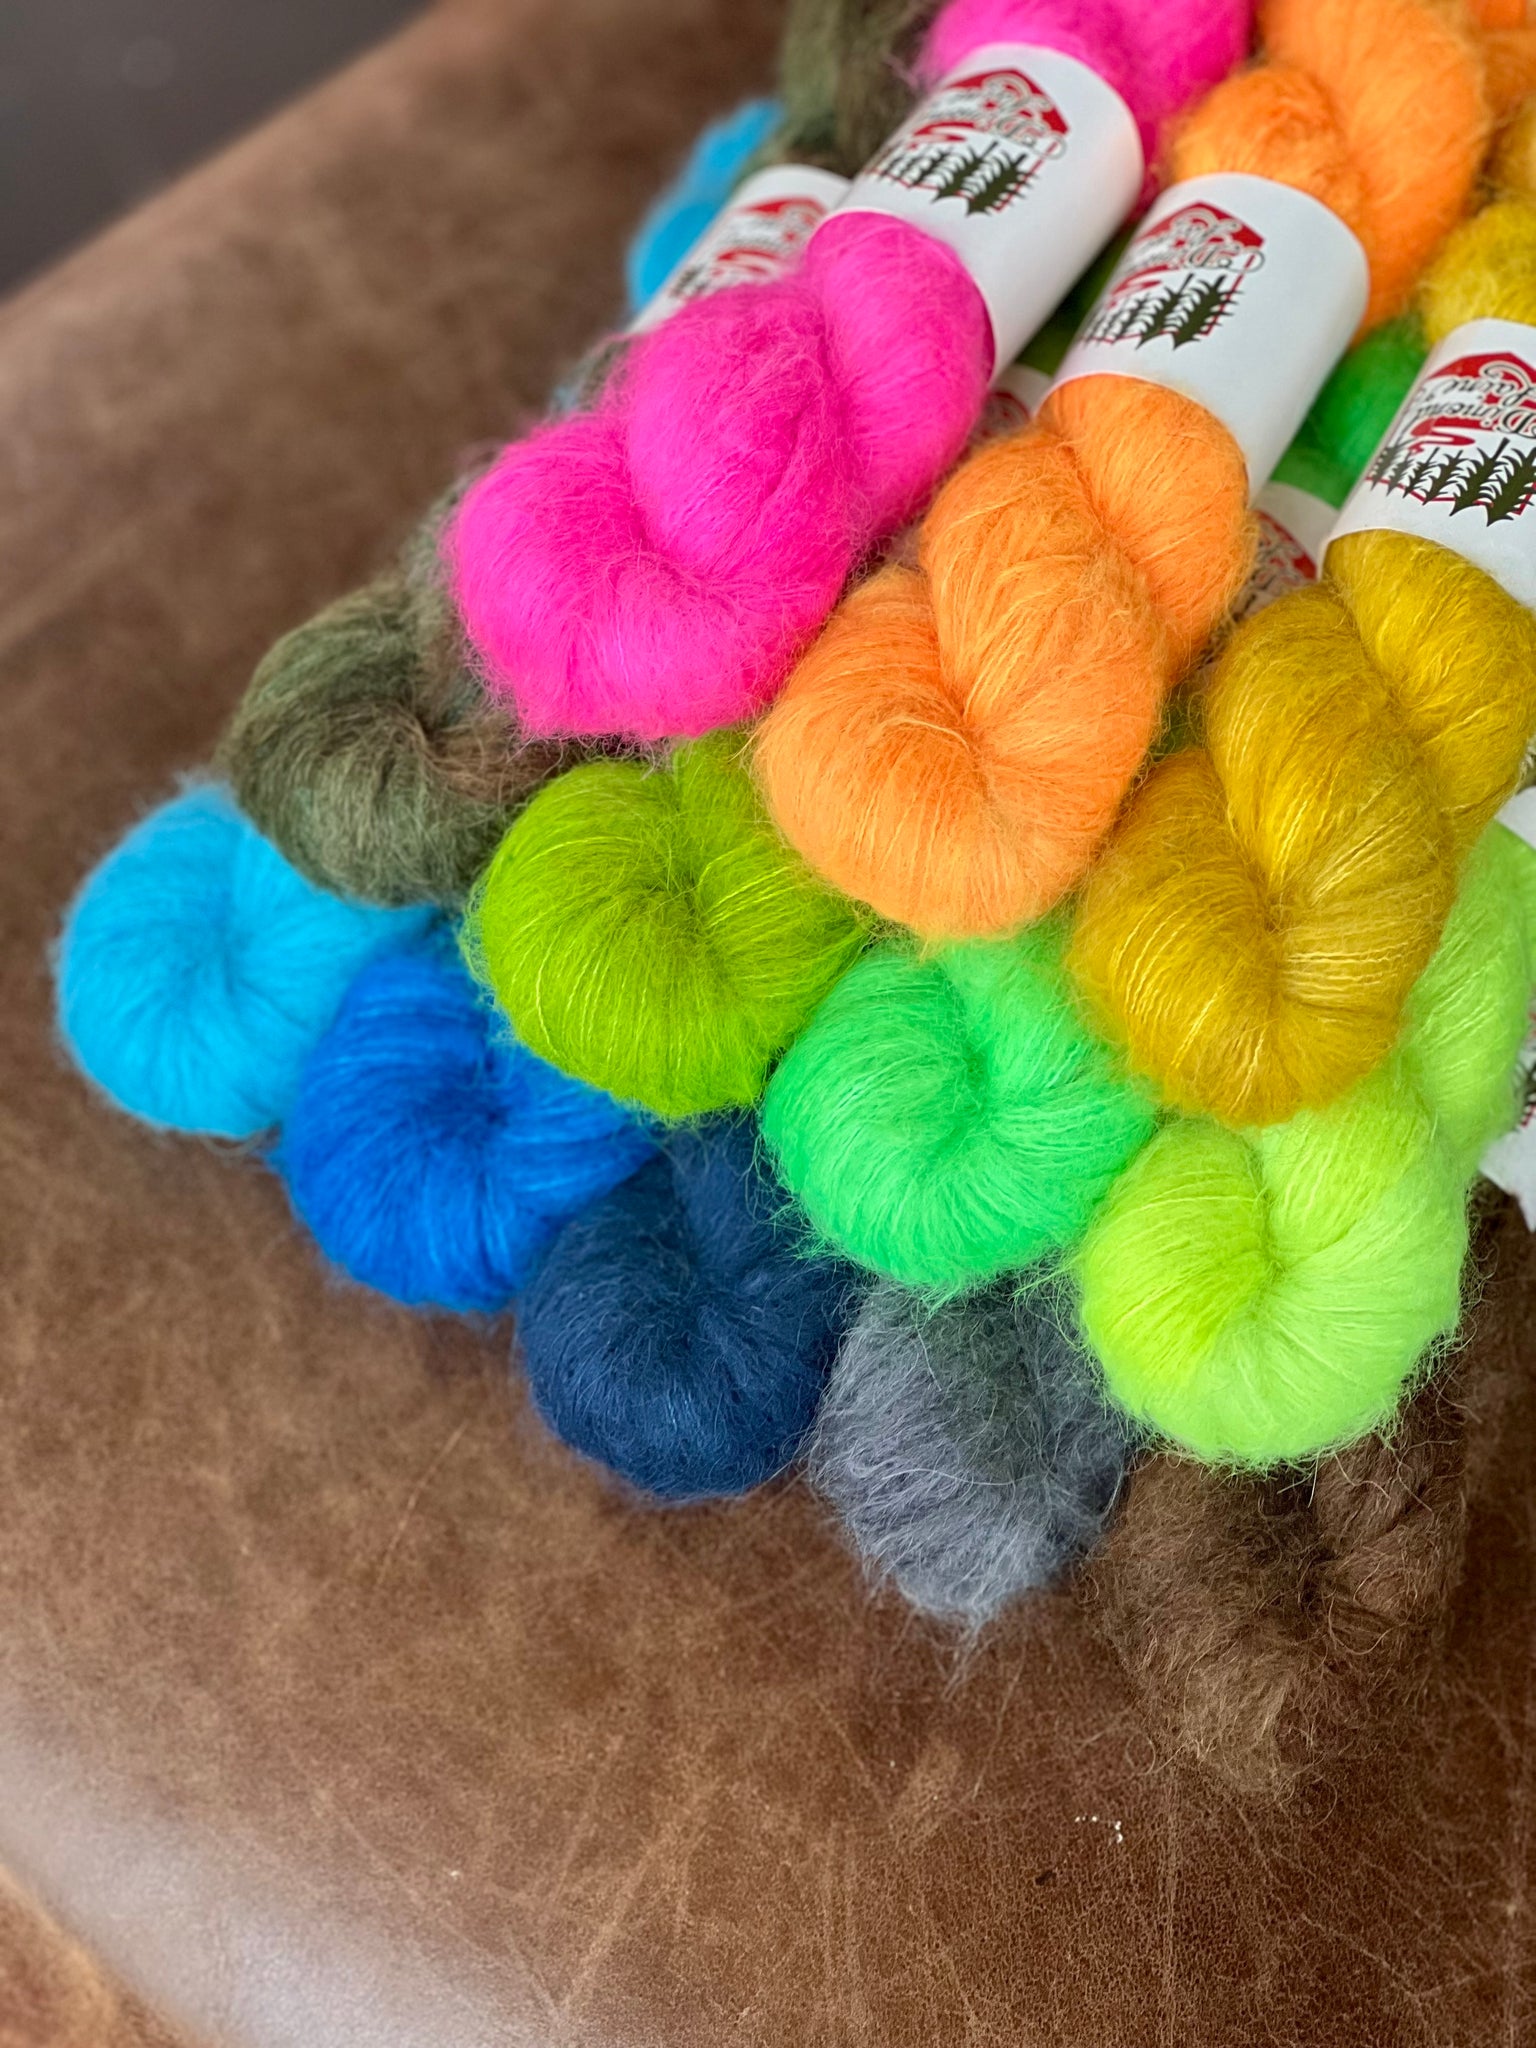 Weekend Dyed-to-Order Event, April 5th - 7th!